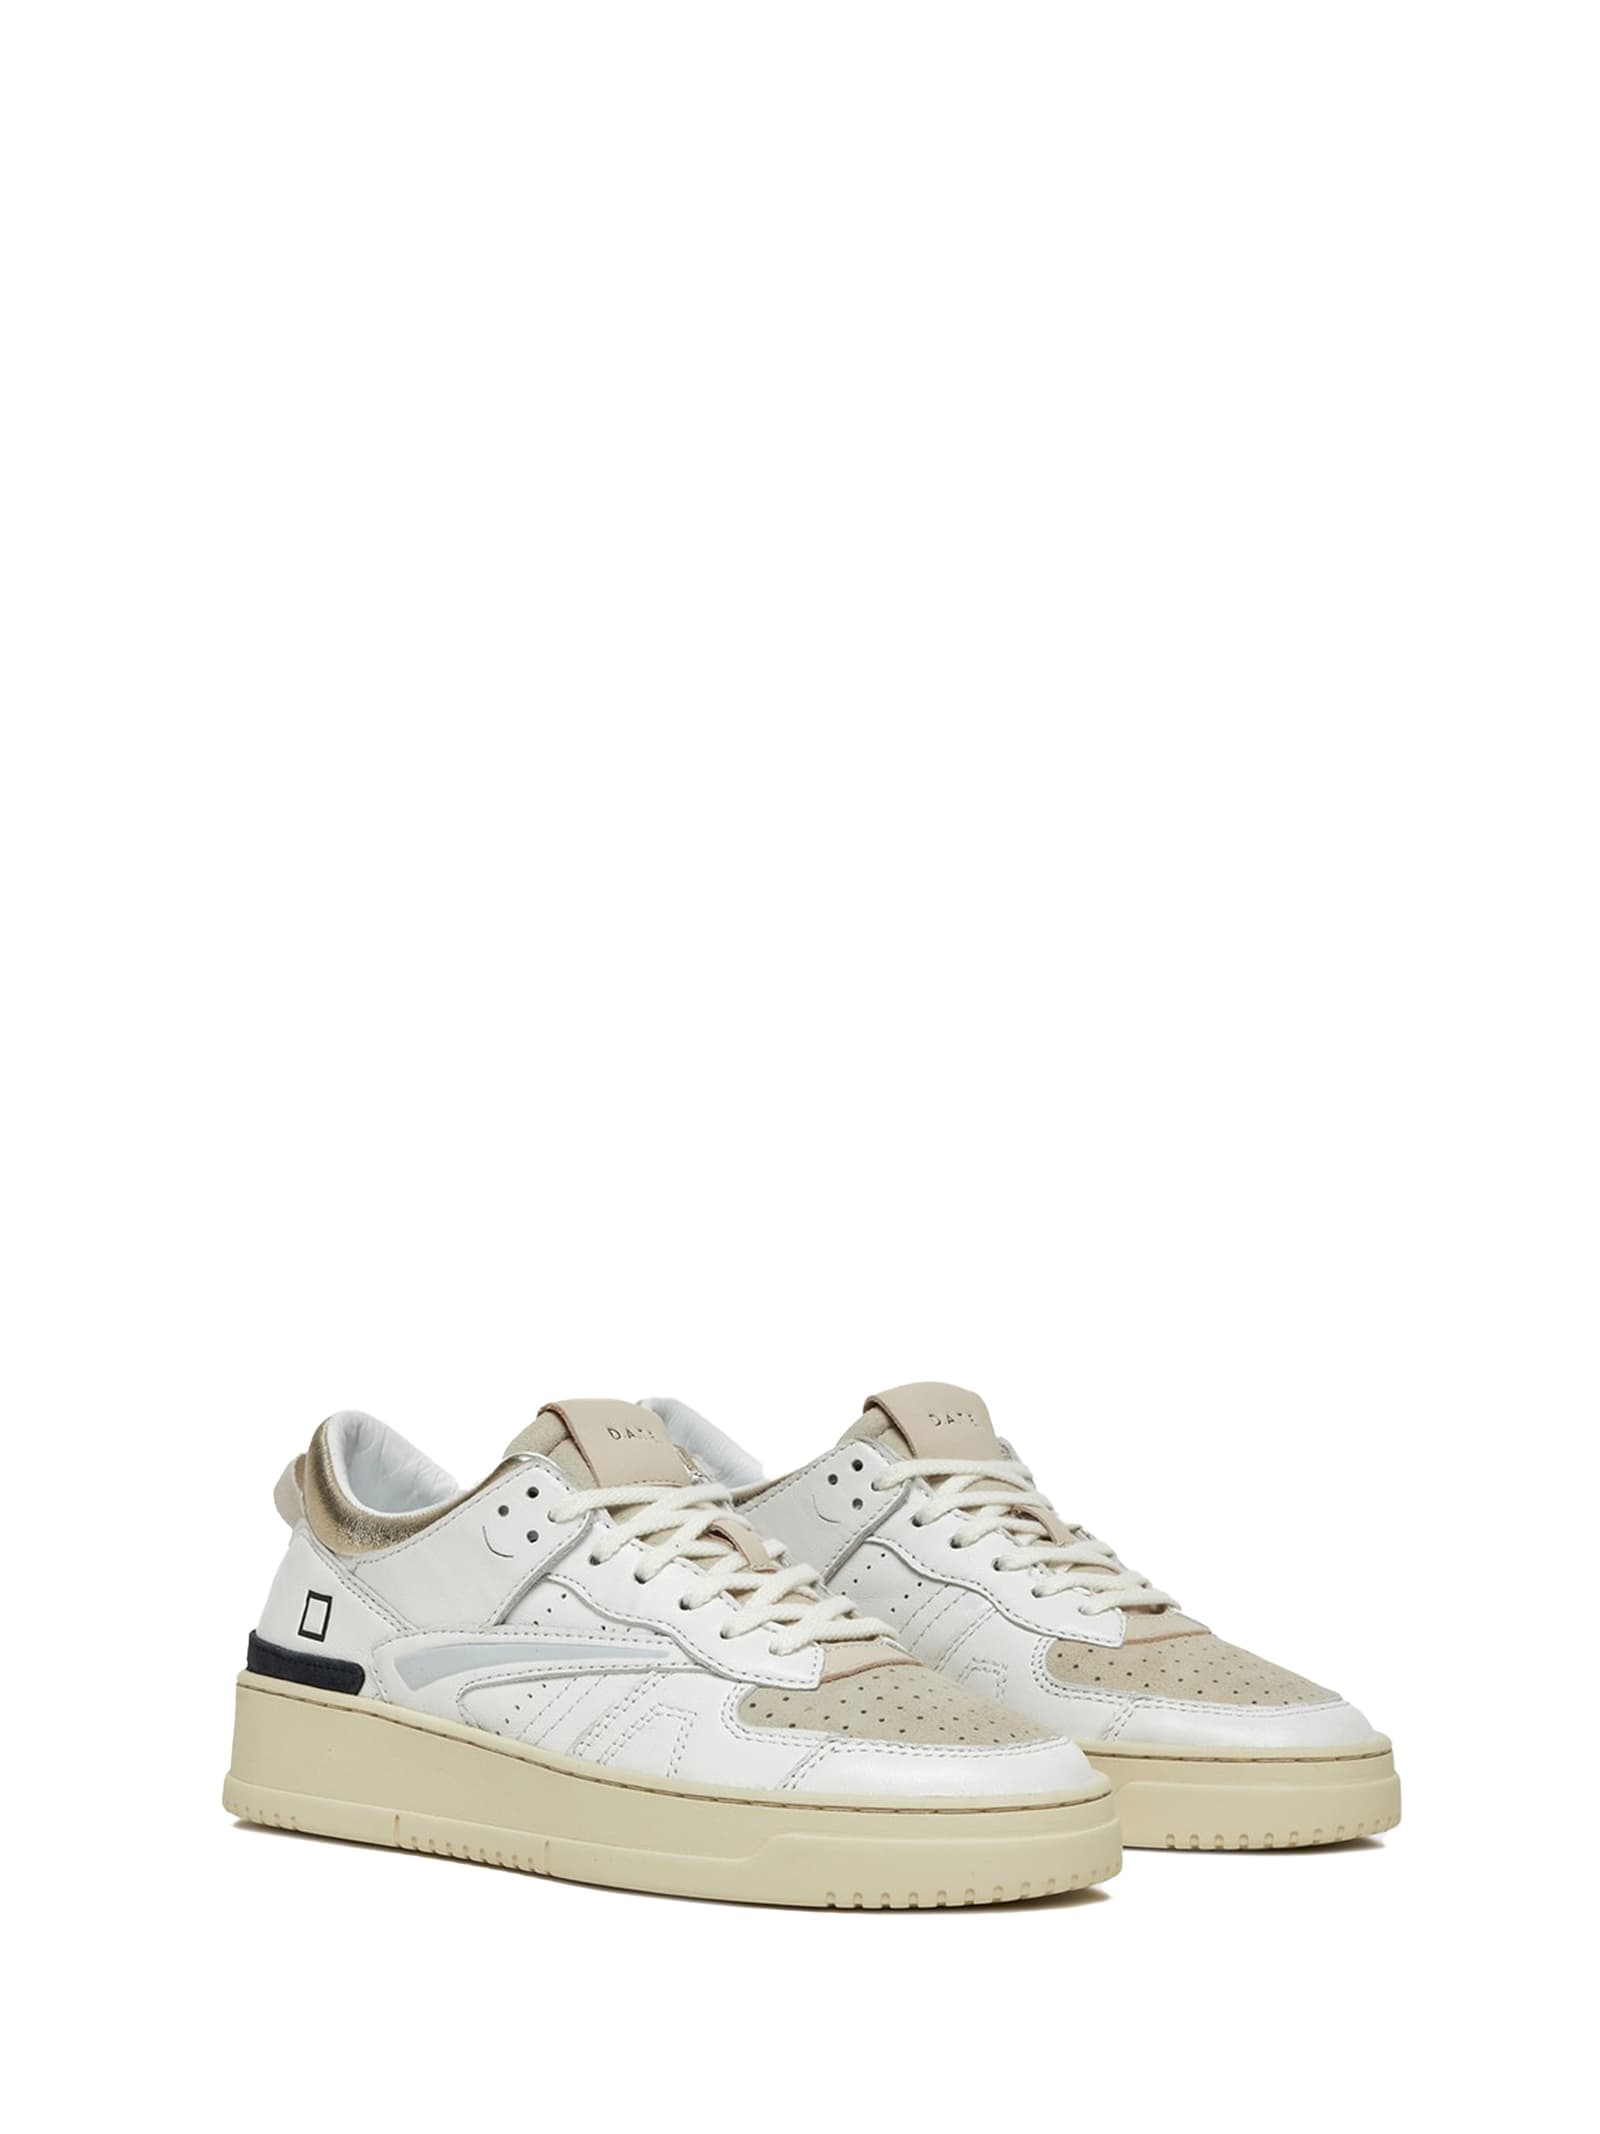 Shop Date Womens Torneo White Gold Leather Sneaker